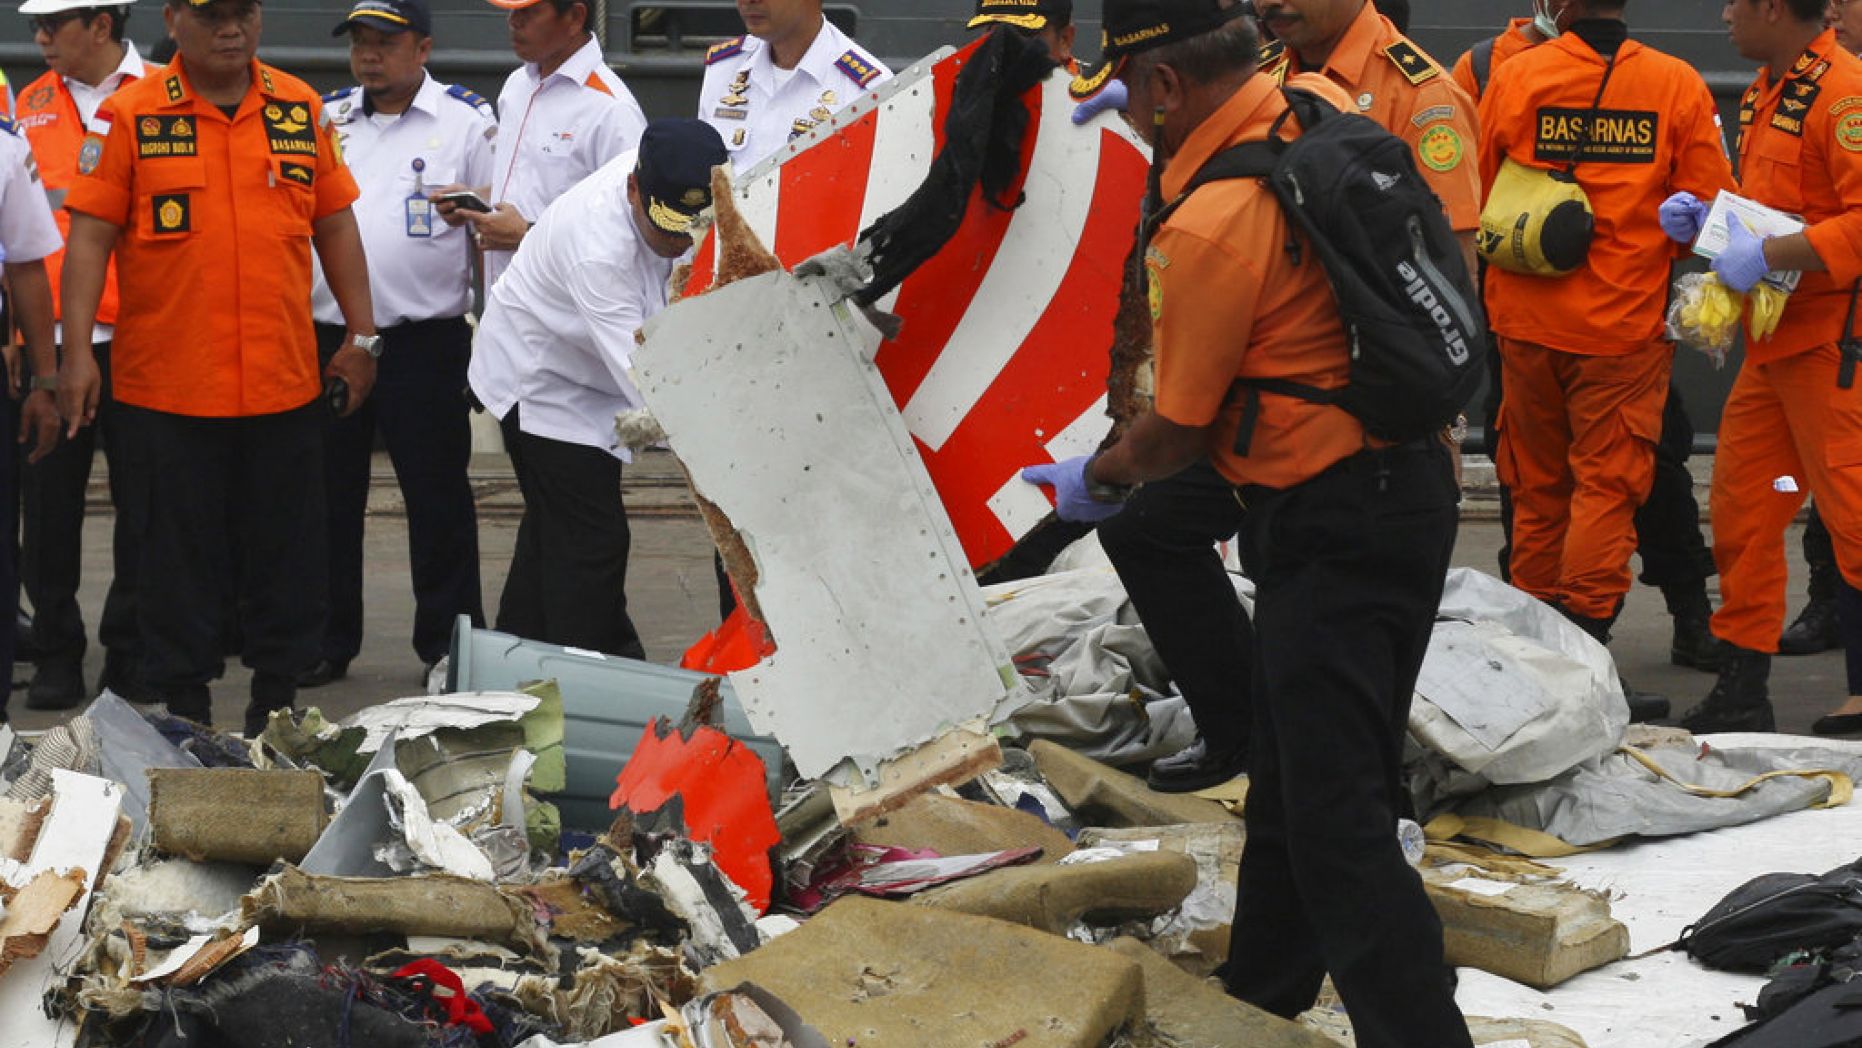 Rescuers inspect part of Lion Air plane flight JT 610 retrieved from the waters where it’s believed to have crashed at Tanjung Priok Port in Jakarta, Indonesia